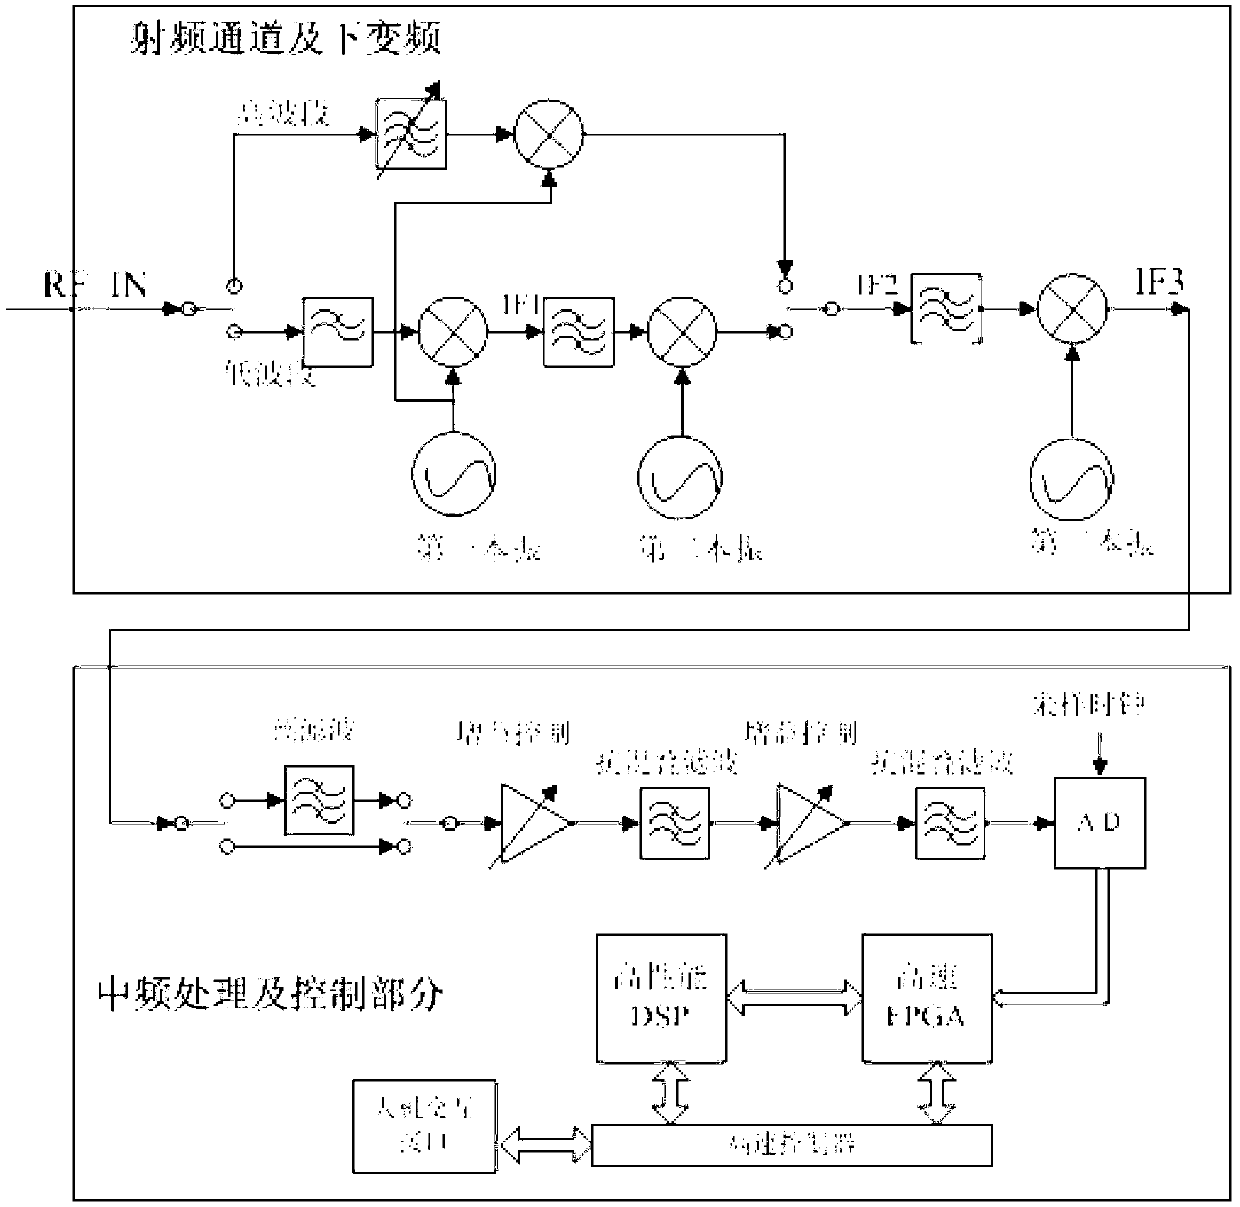 Fast Fourier transform (FFT) broadband frequency spectrometer design based on AD9864 medium frequency digitization system